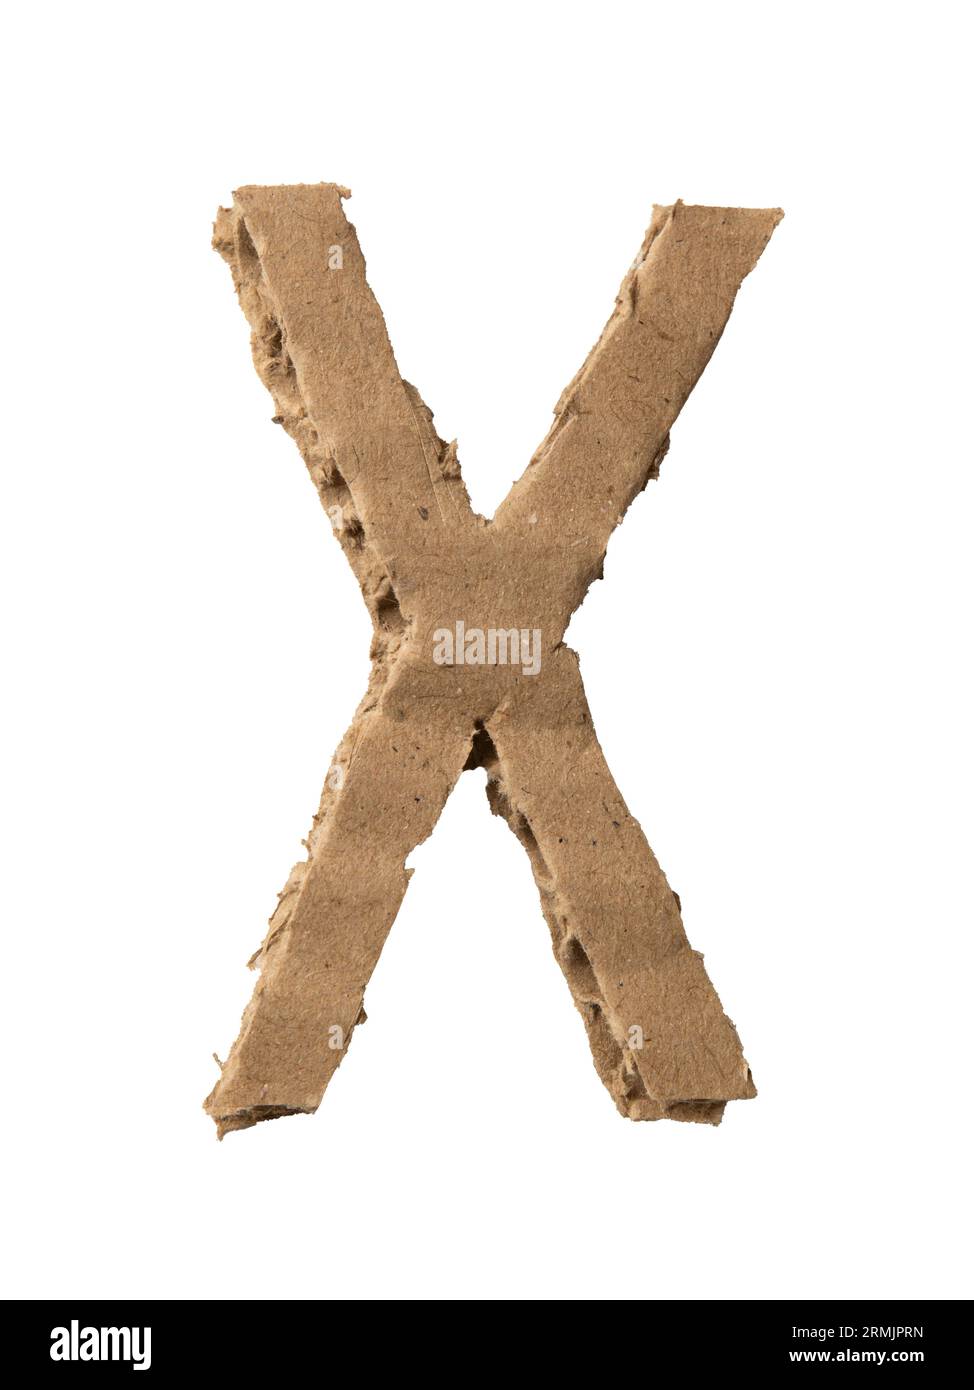 X alphabet cut out of cardboard paper Stock Photo